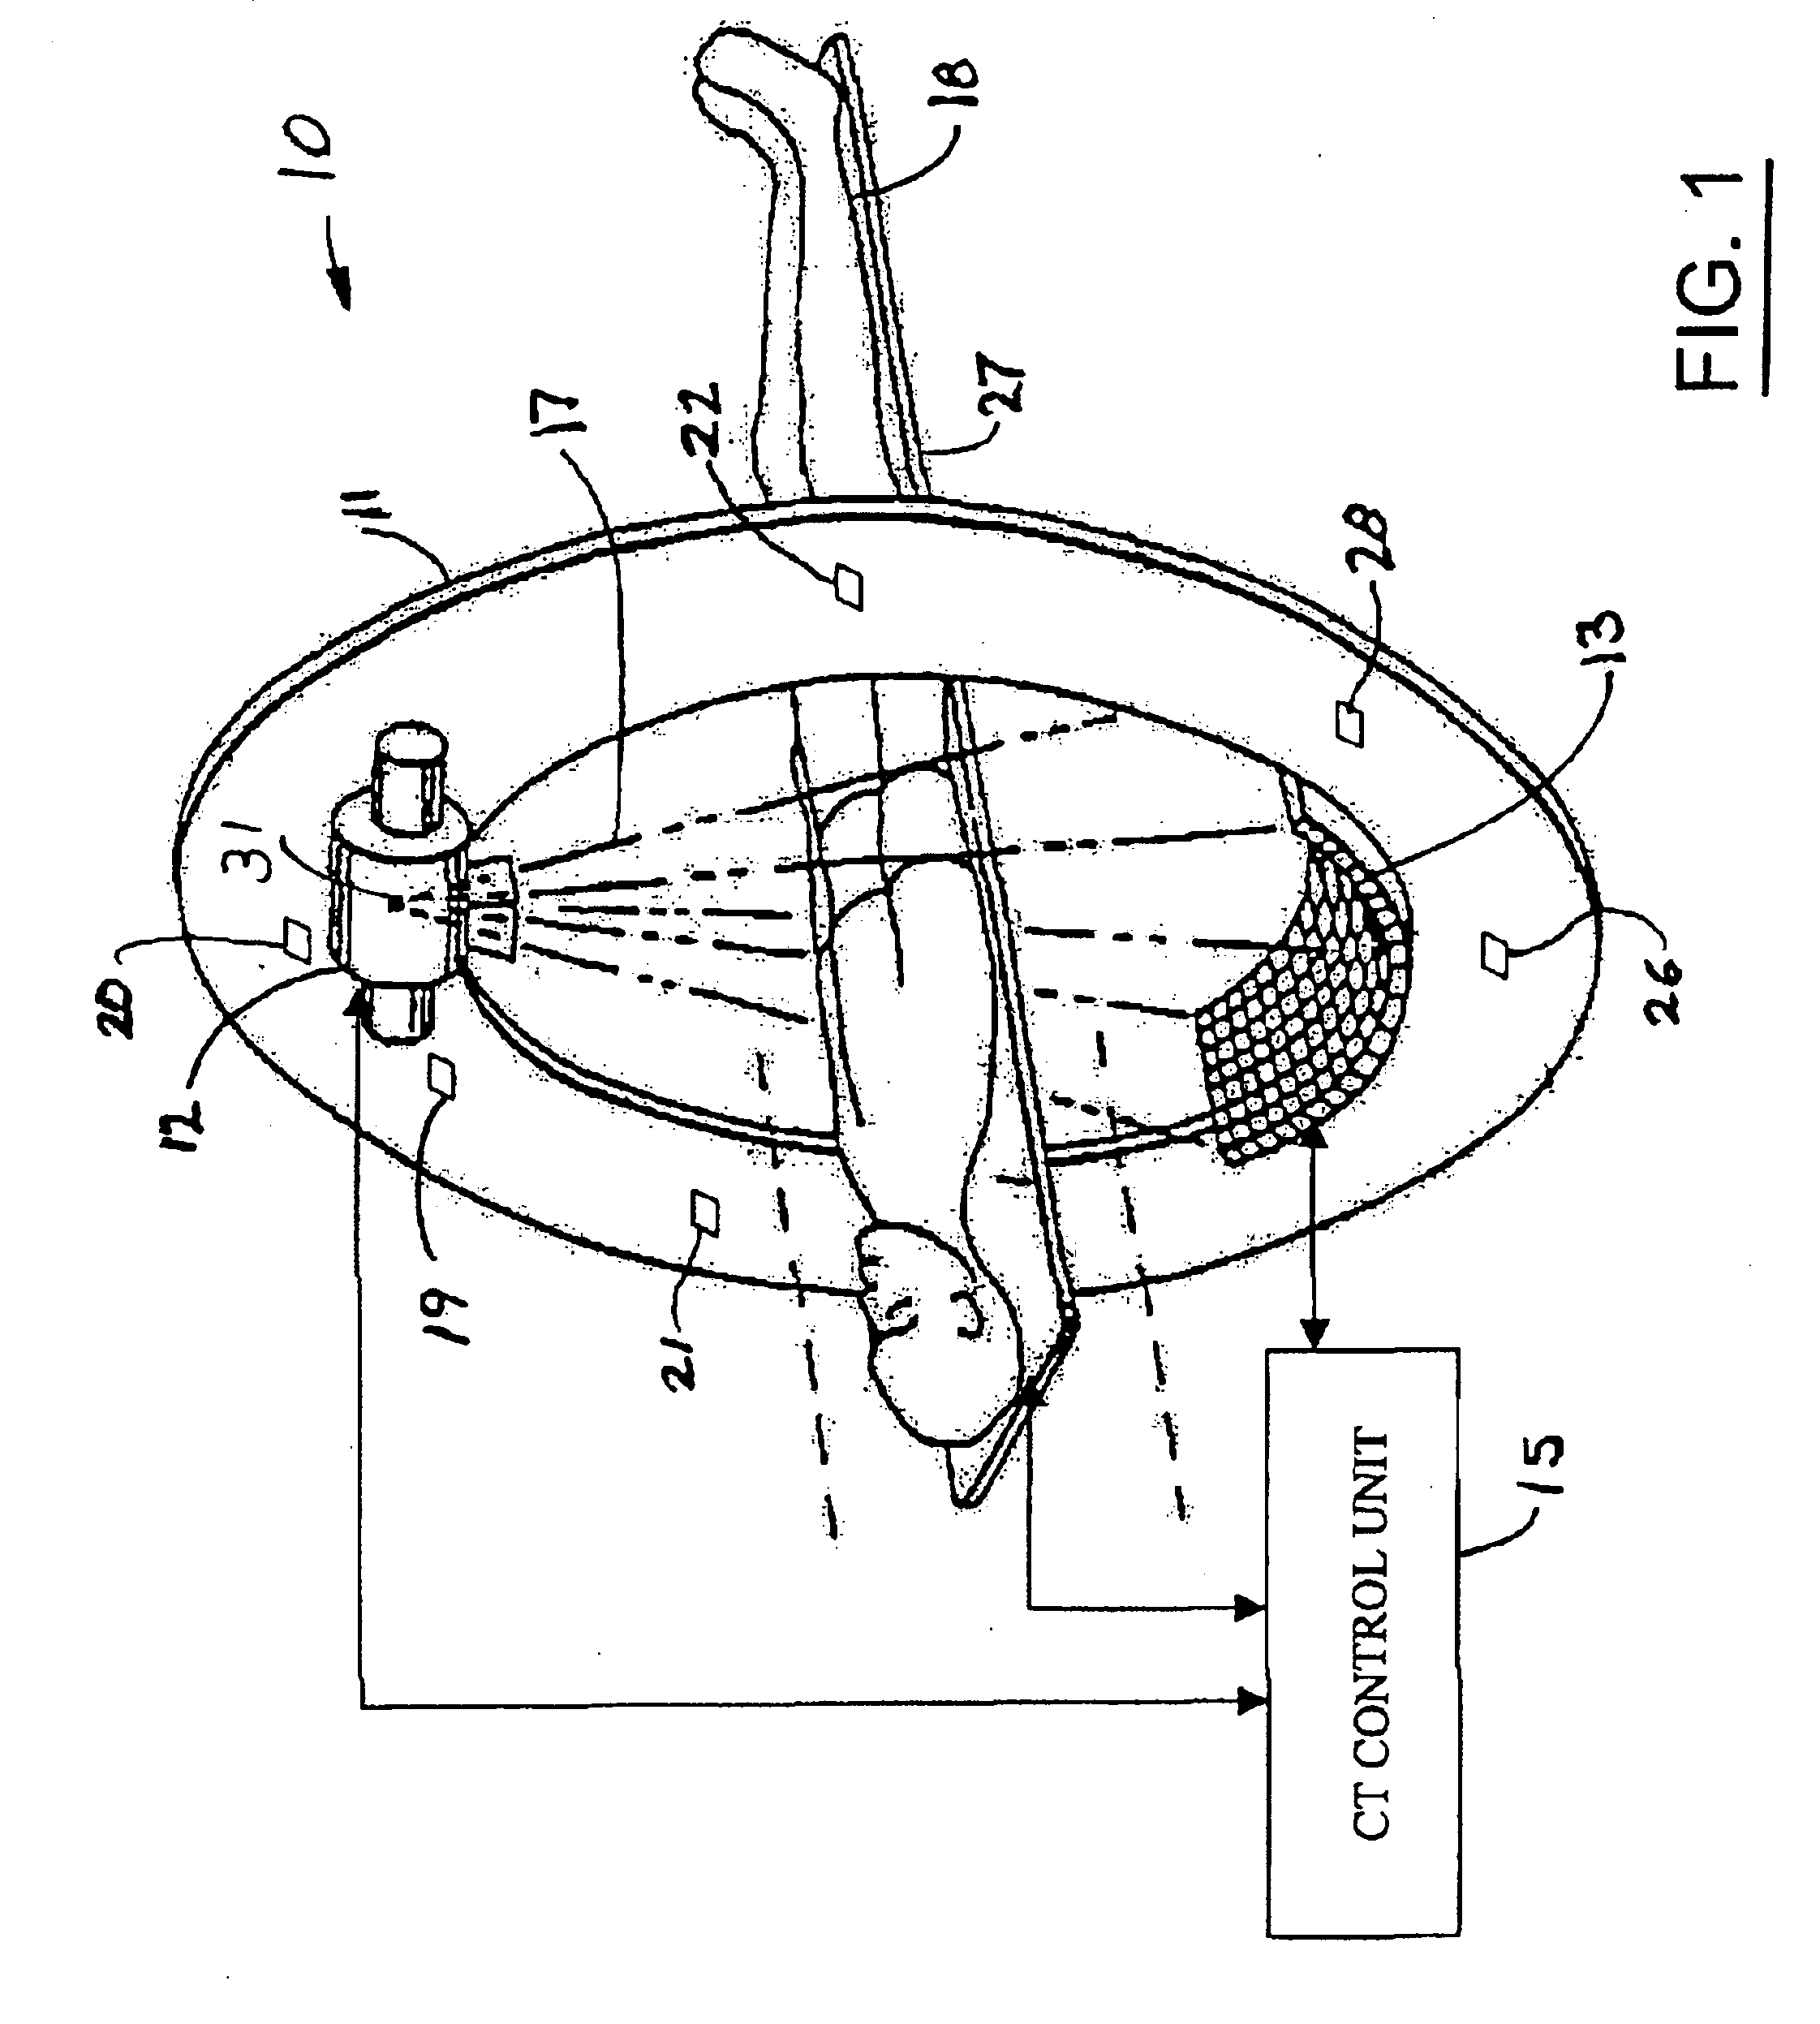 Computed tomography system with integrated scatter detectors